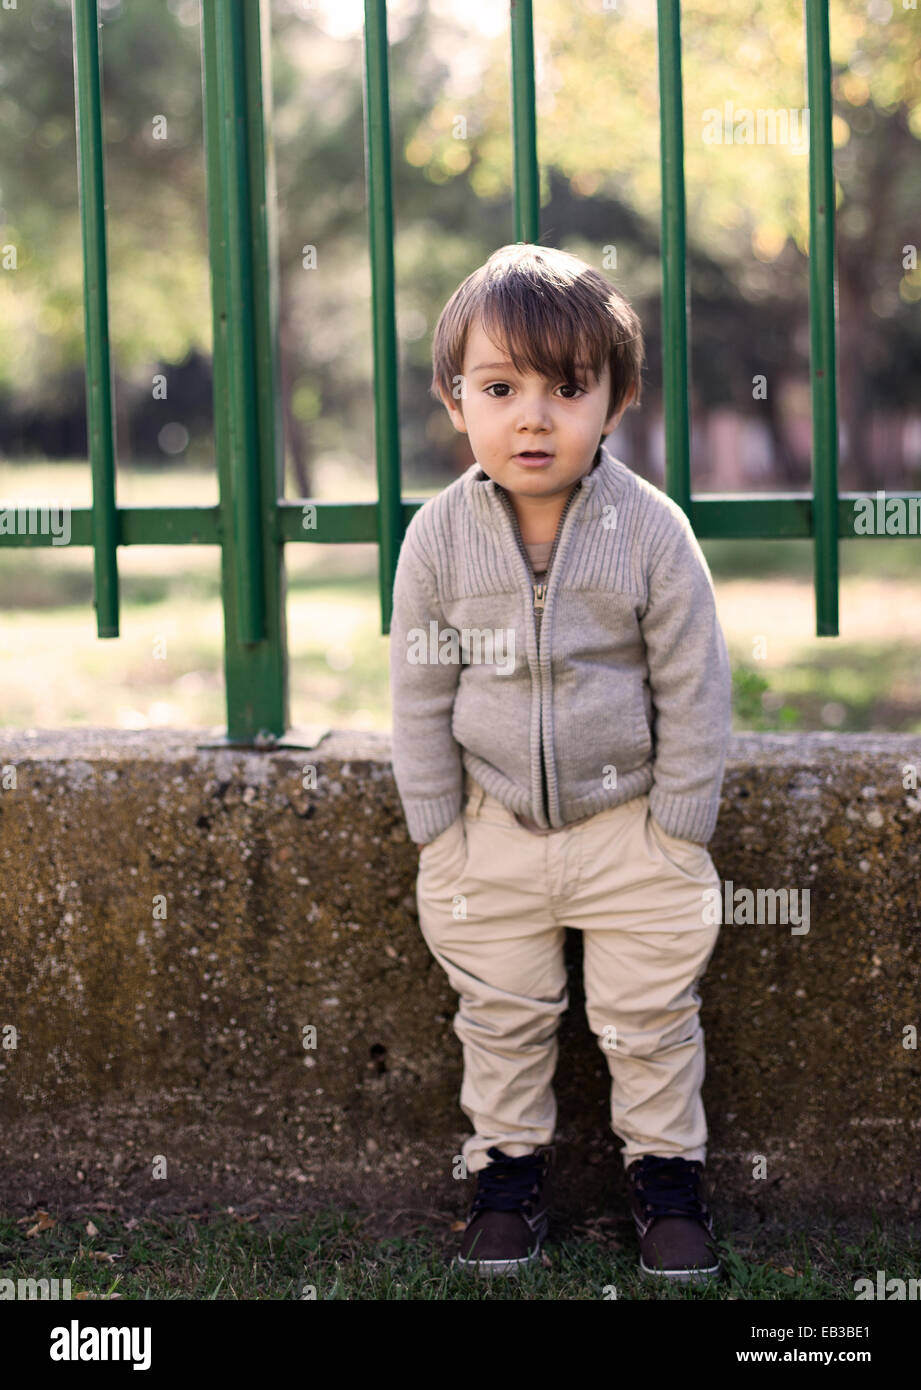 Boy standing by railings with his hands in his pockets Stock Photo